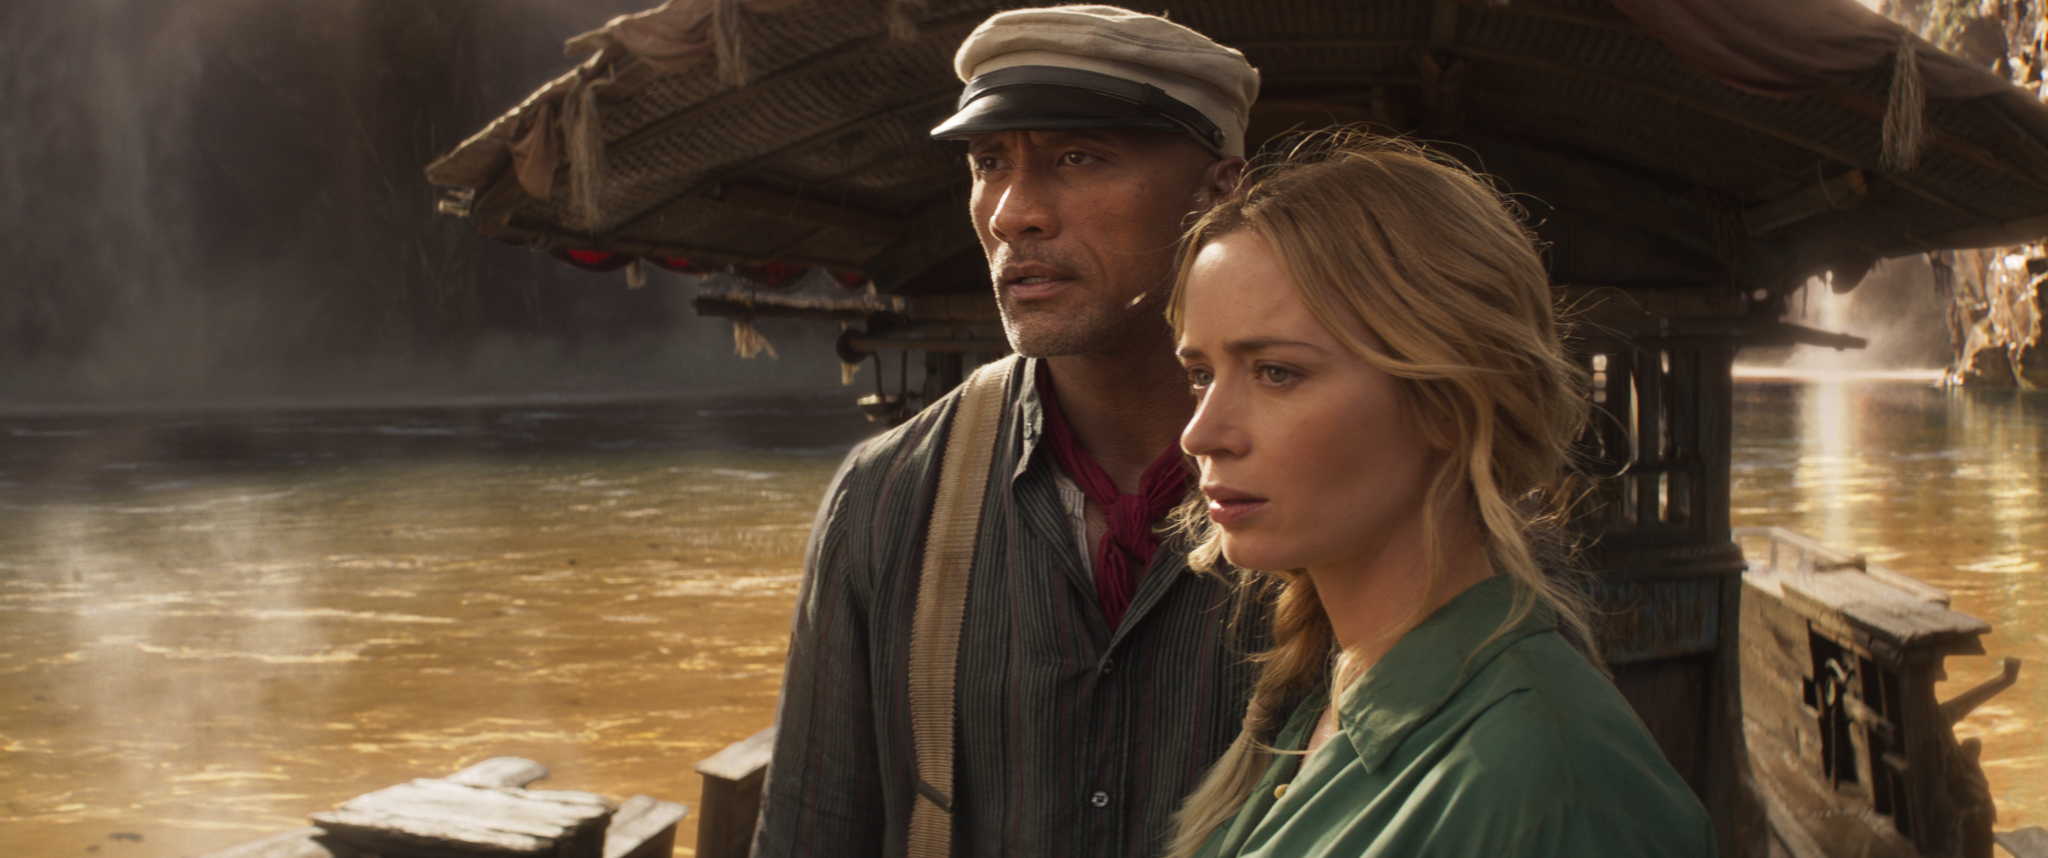 Disney’s Jungle Cruise Release Date Revealed By Dwayne Johnson